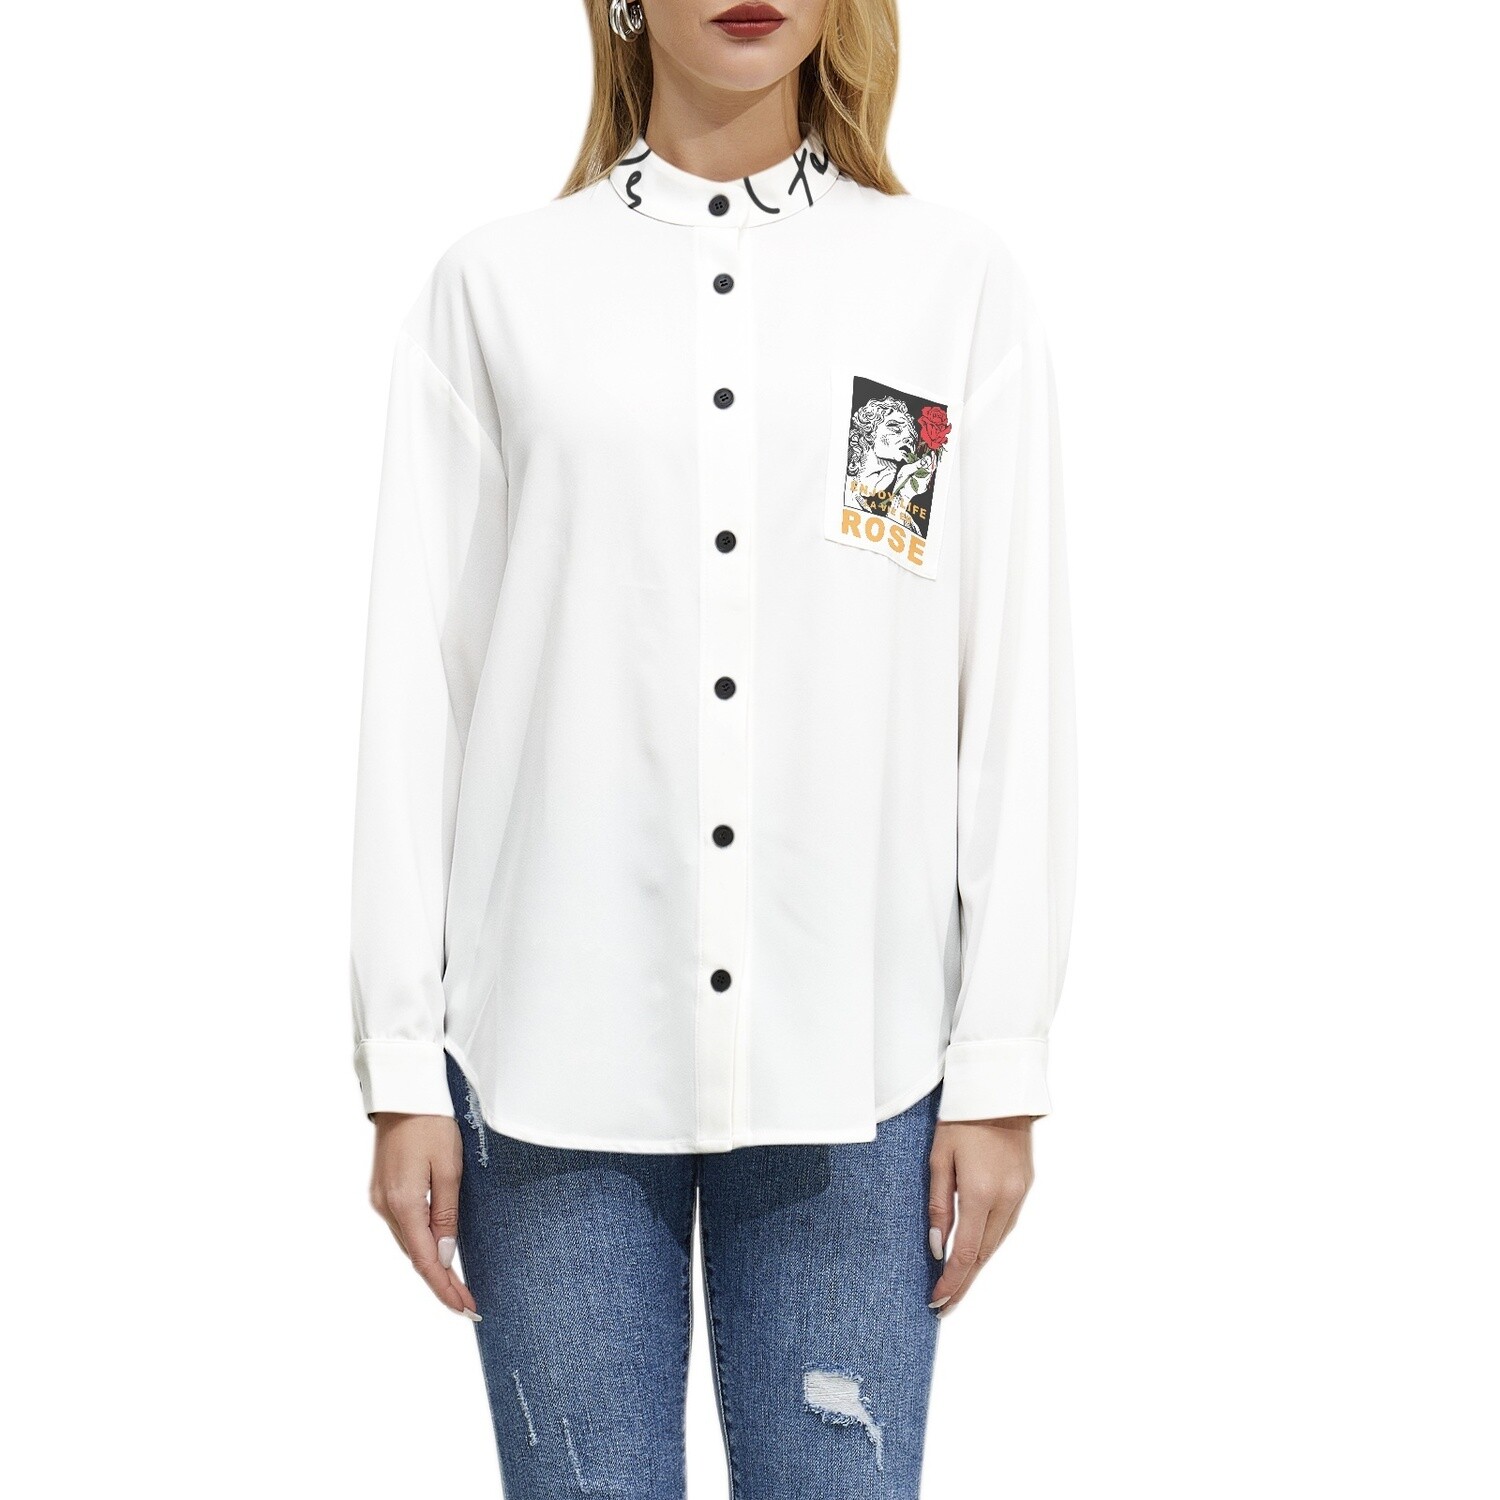 Franc d'Or Signature Collection - Women's Long Sleeve Button Up Casual Shirt Top